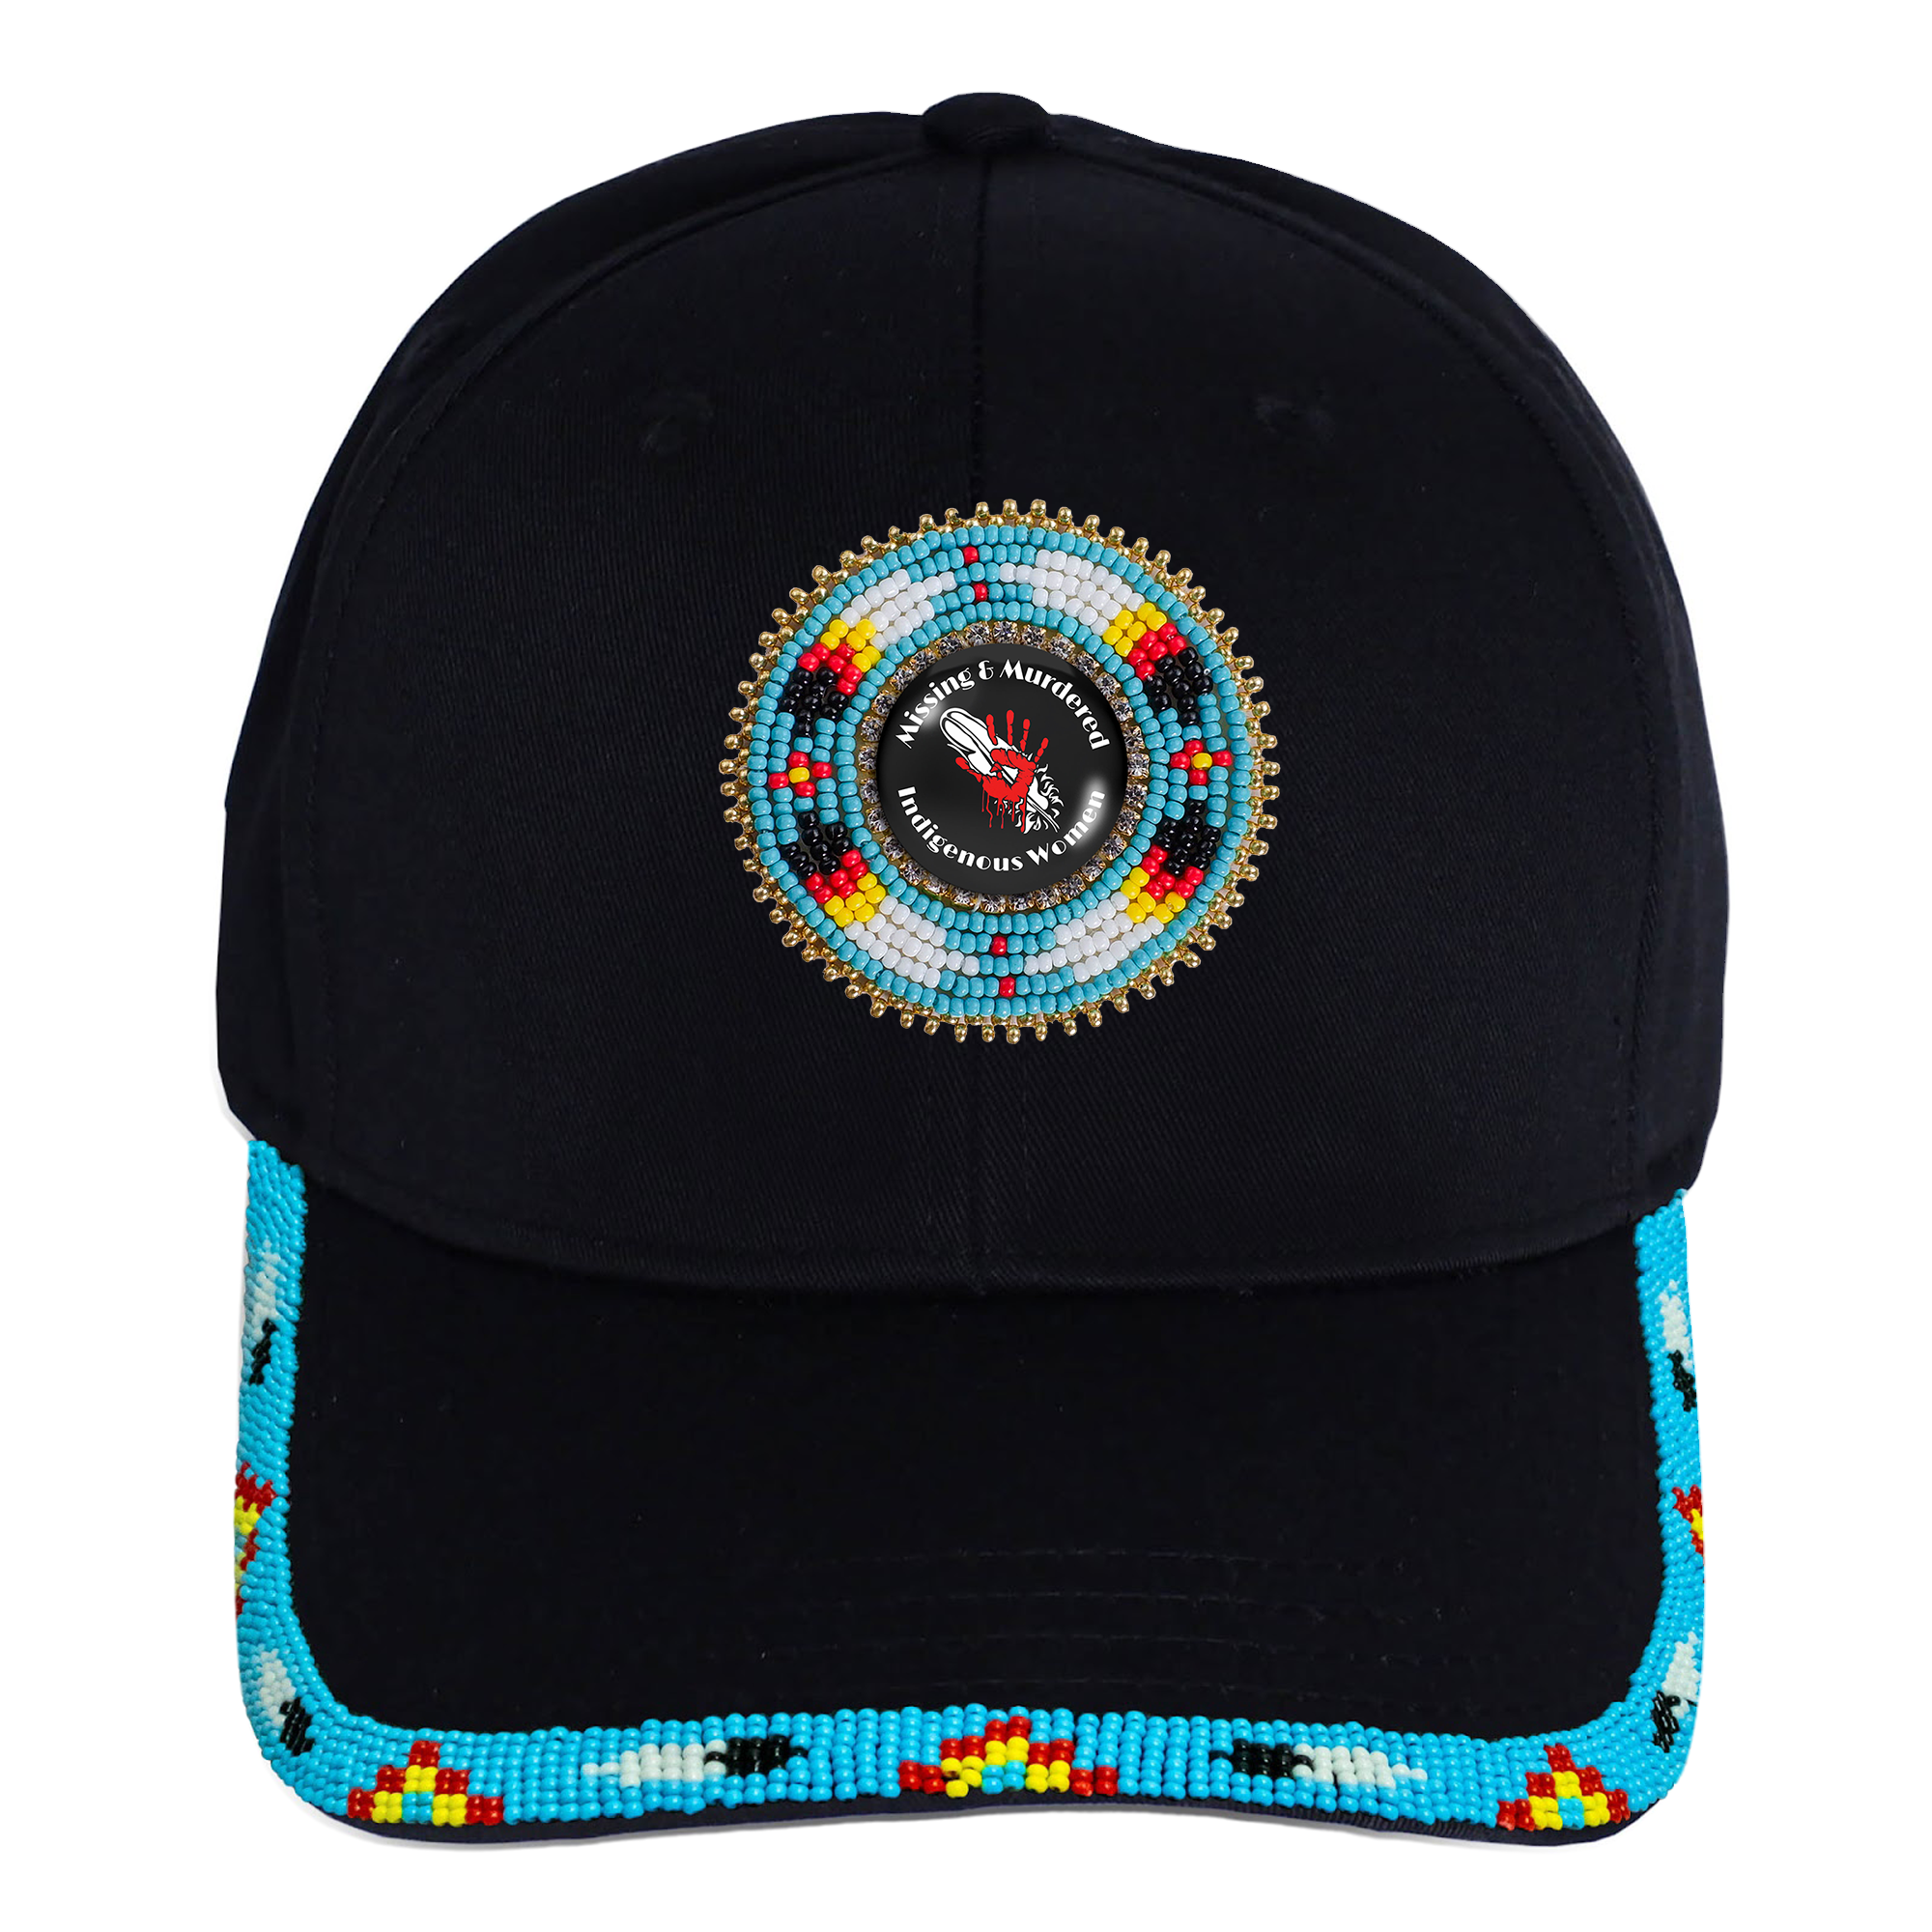 SALE 50% OFF - MMIW Blue Baseball Cap With Patch Brim Unisex Native American Style